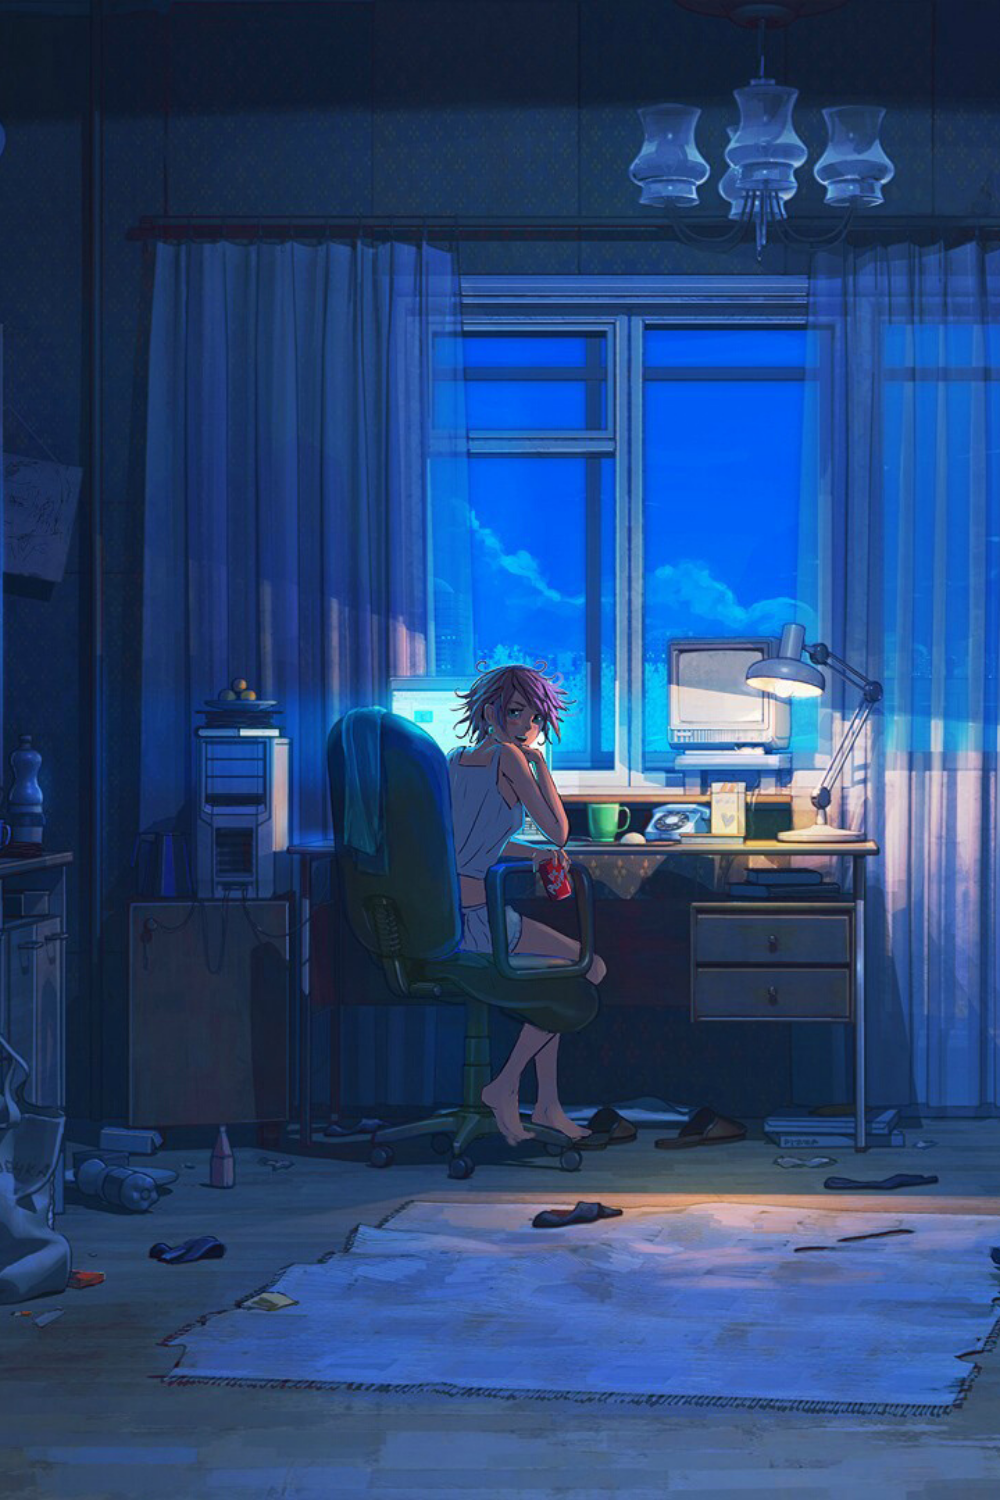 Late night chillin'. HD anime wallpaper, Android wallpaper, Anime scenery wallpaper